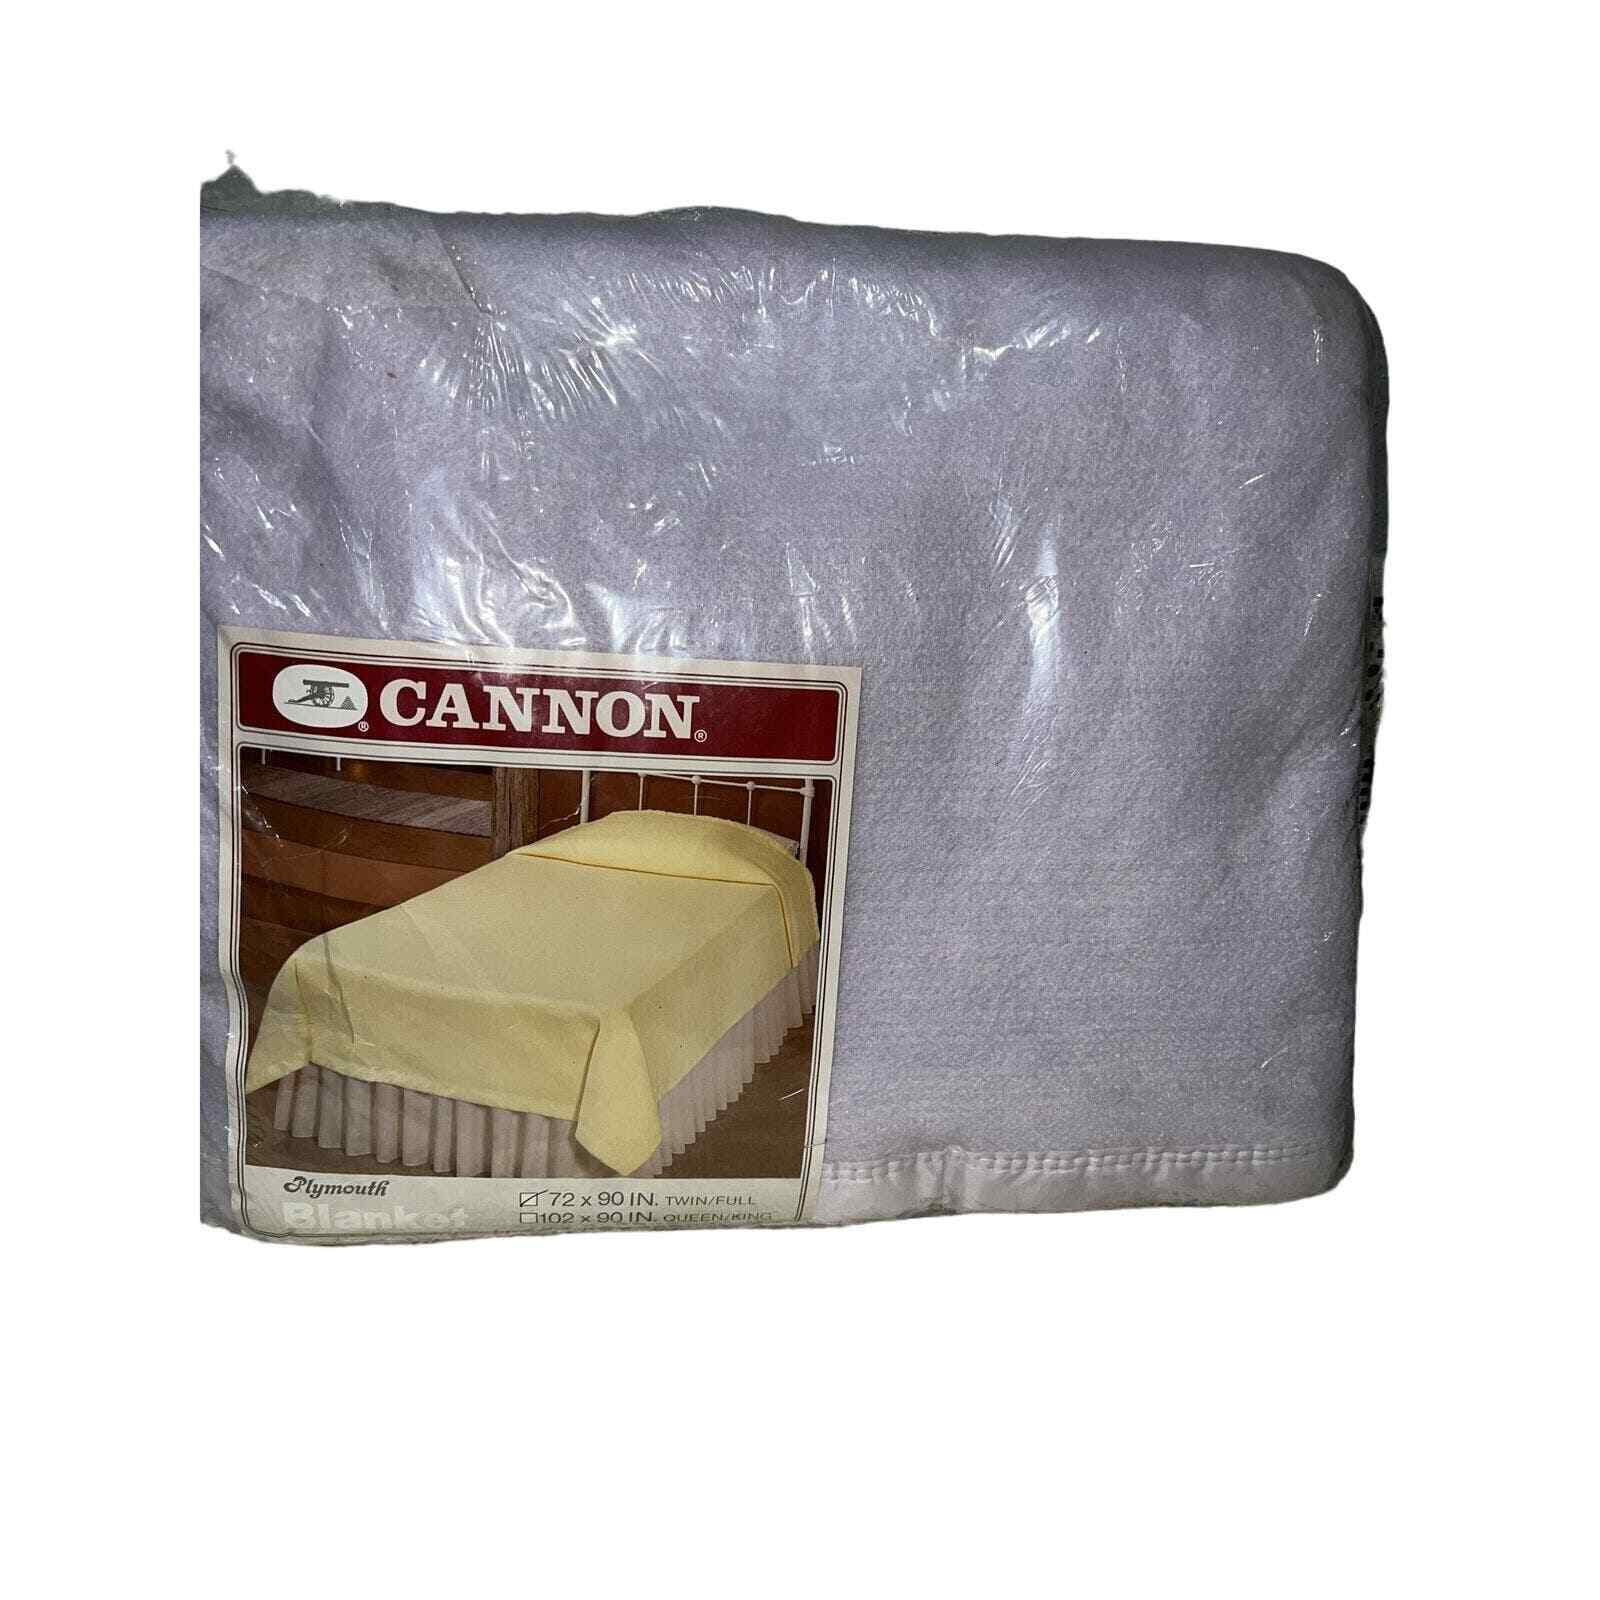 Plymouth Blanket By Cannon Lavender 72x90 Vintage 100% Poly, Nylon Binding